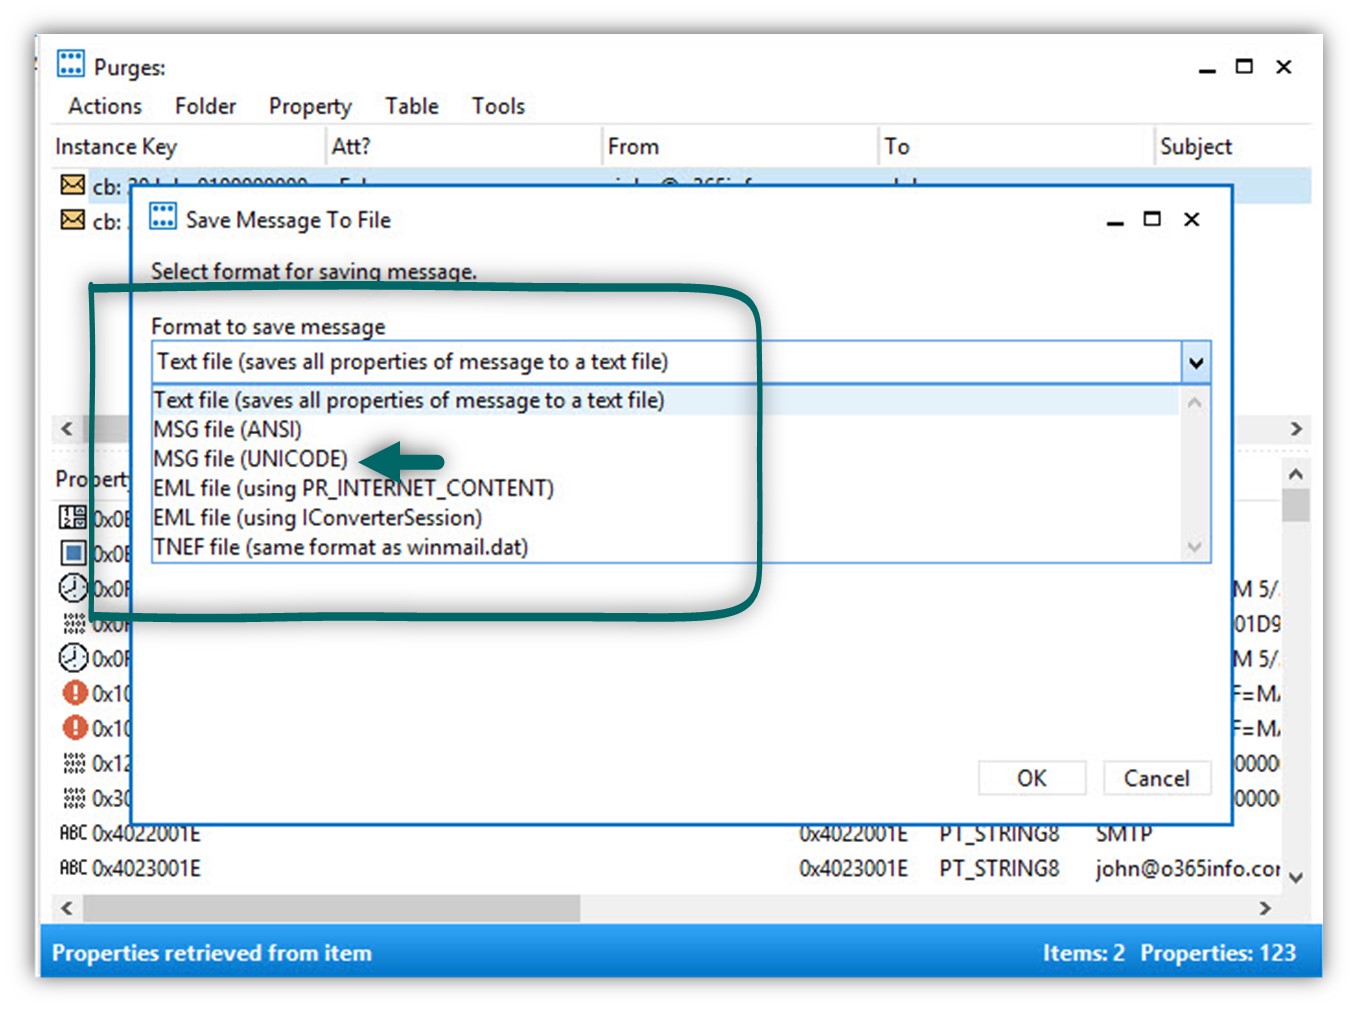 Recover mail item using MFCMAPI -10